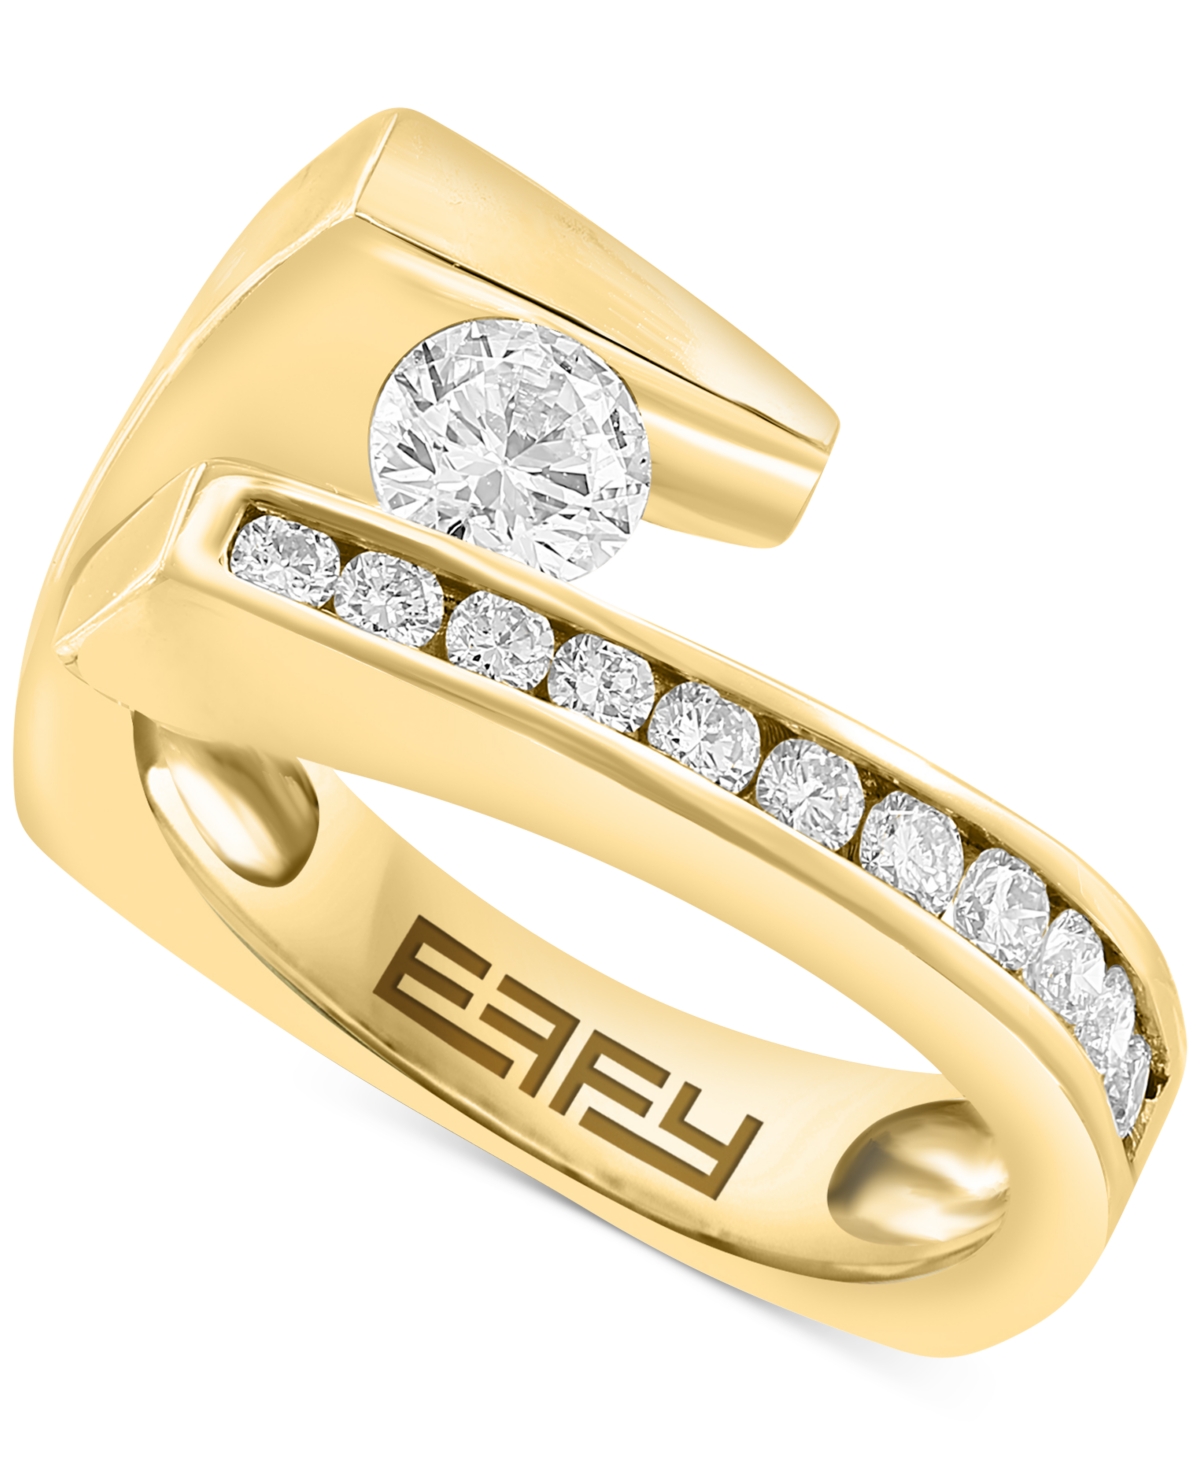 Effy Diamond Abstract Channel-Set Statement Ring (3/4 ct. t.w.) in 14k Gold - Yellow Gol